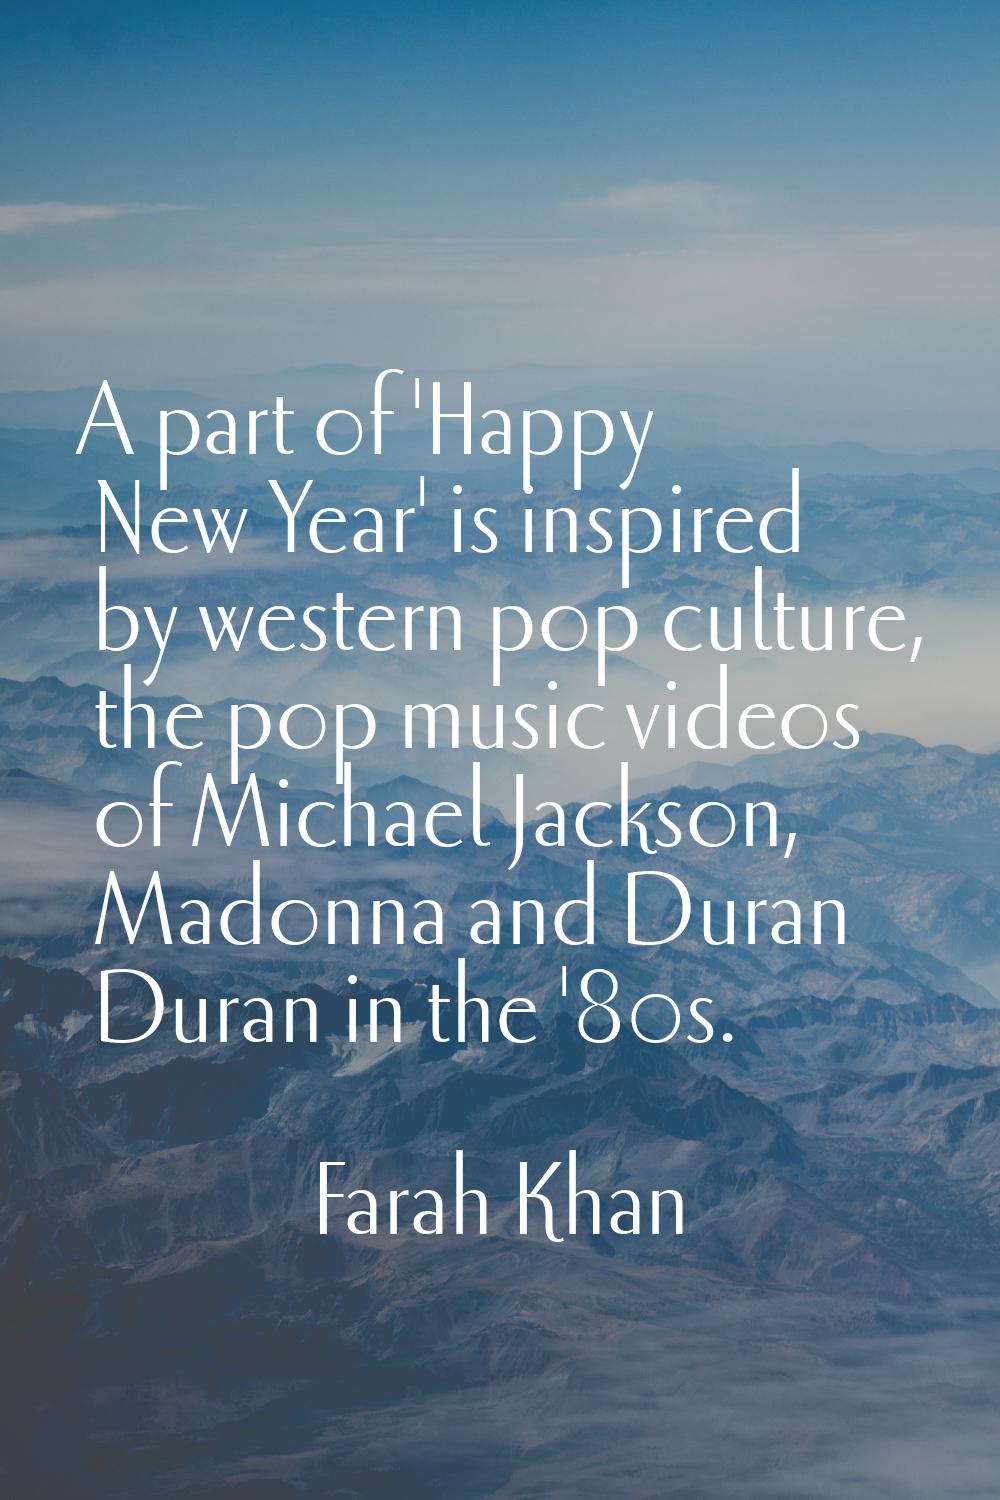 A part of 'Happy New Year' is inspired by western pop culture, the pop music videos of Michael Jack